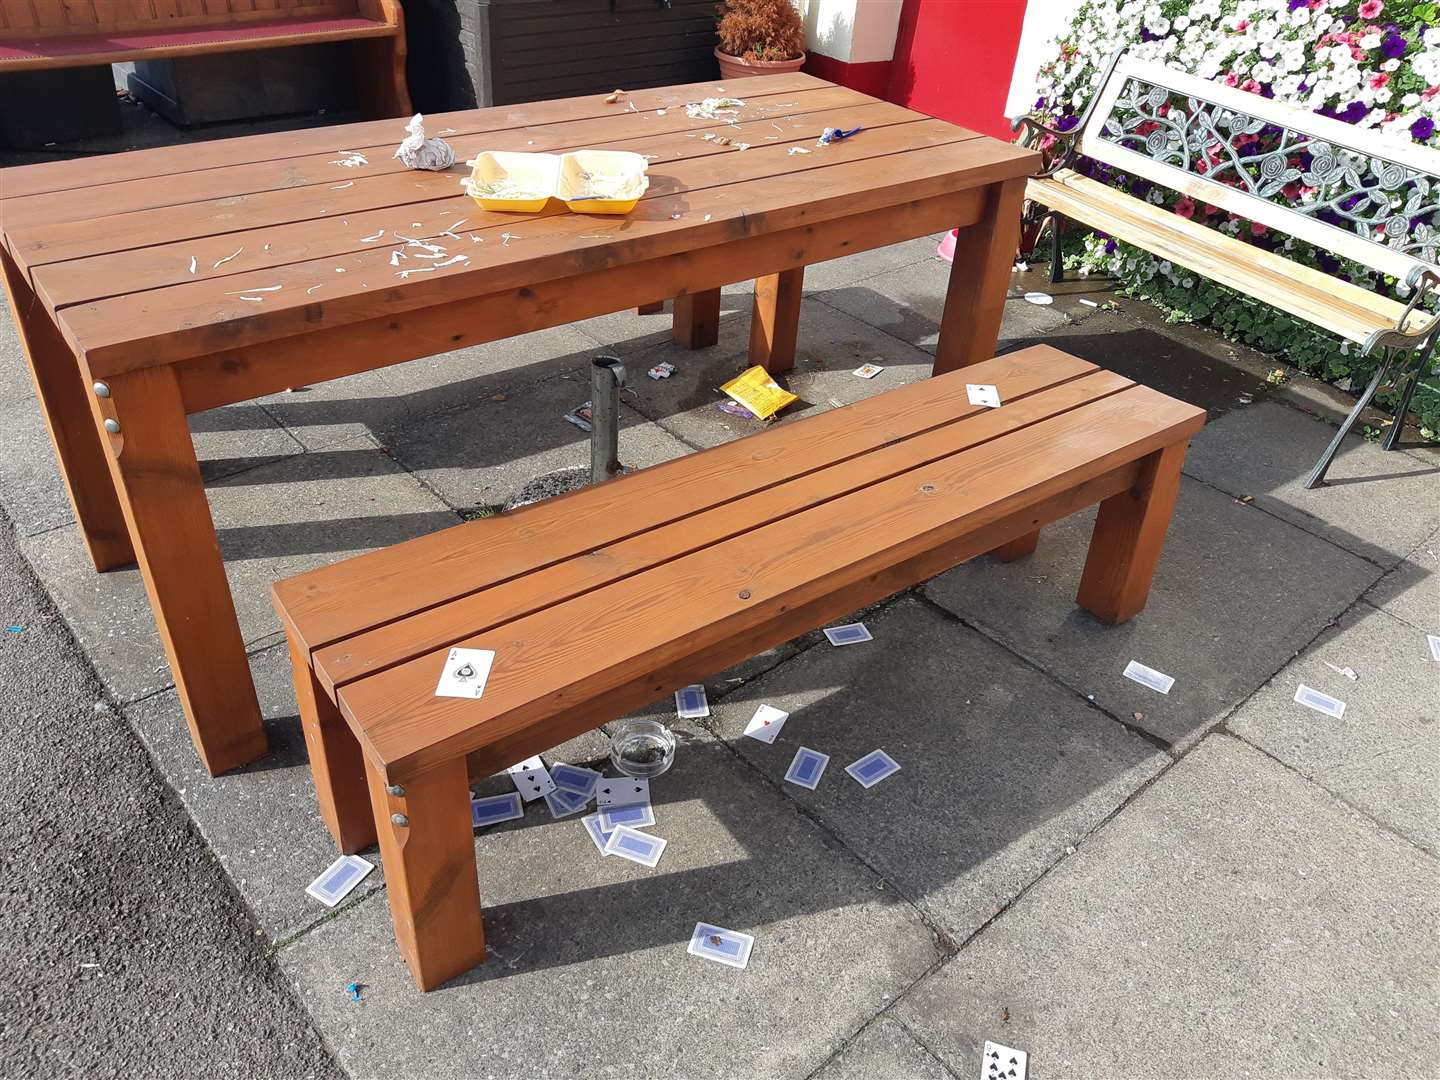 Empty kebab boxes and playing cards have been discarded outside the Deal pub